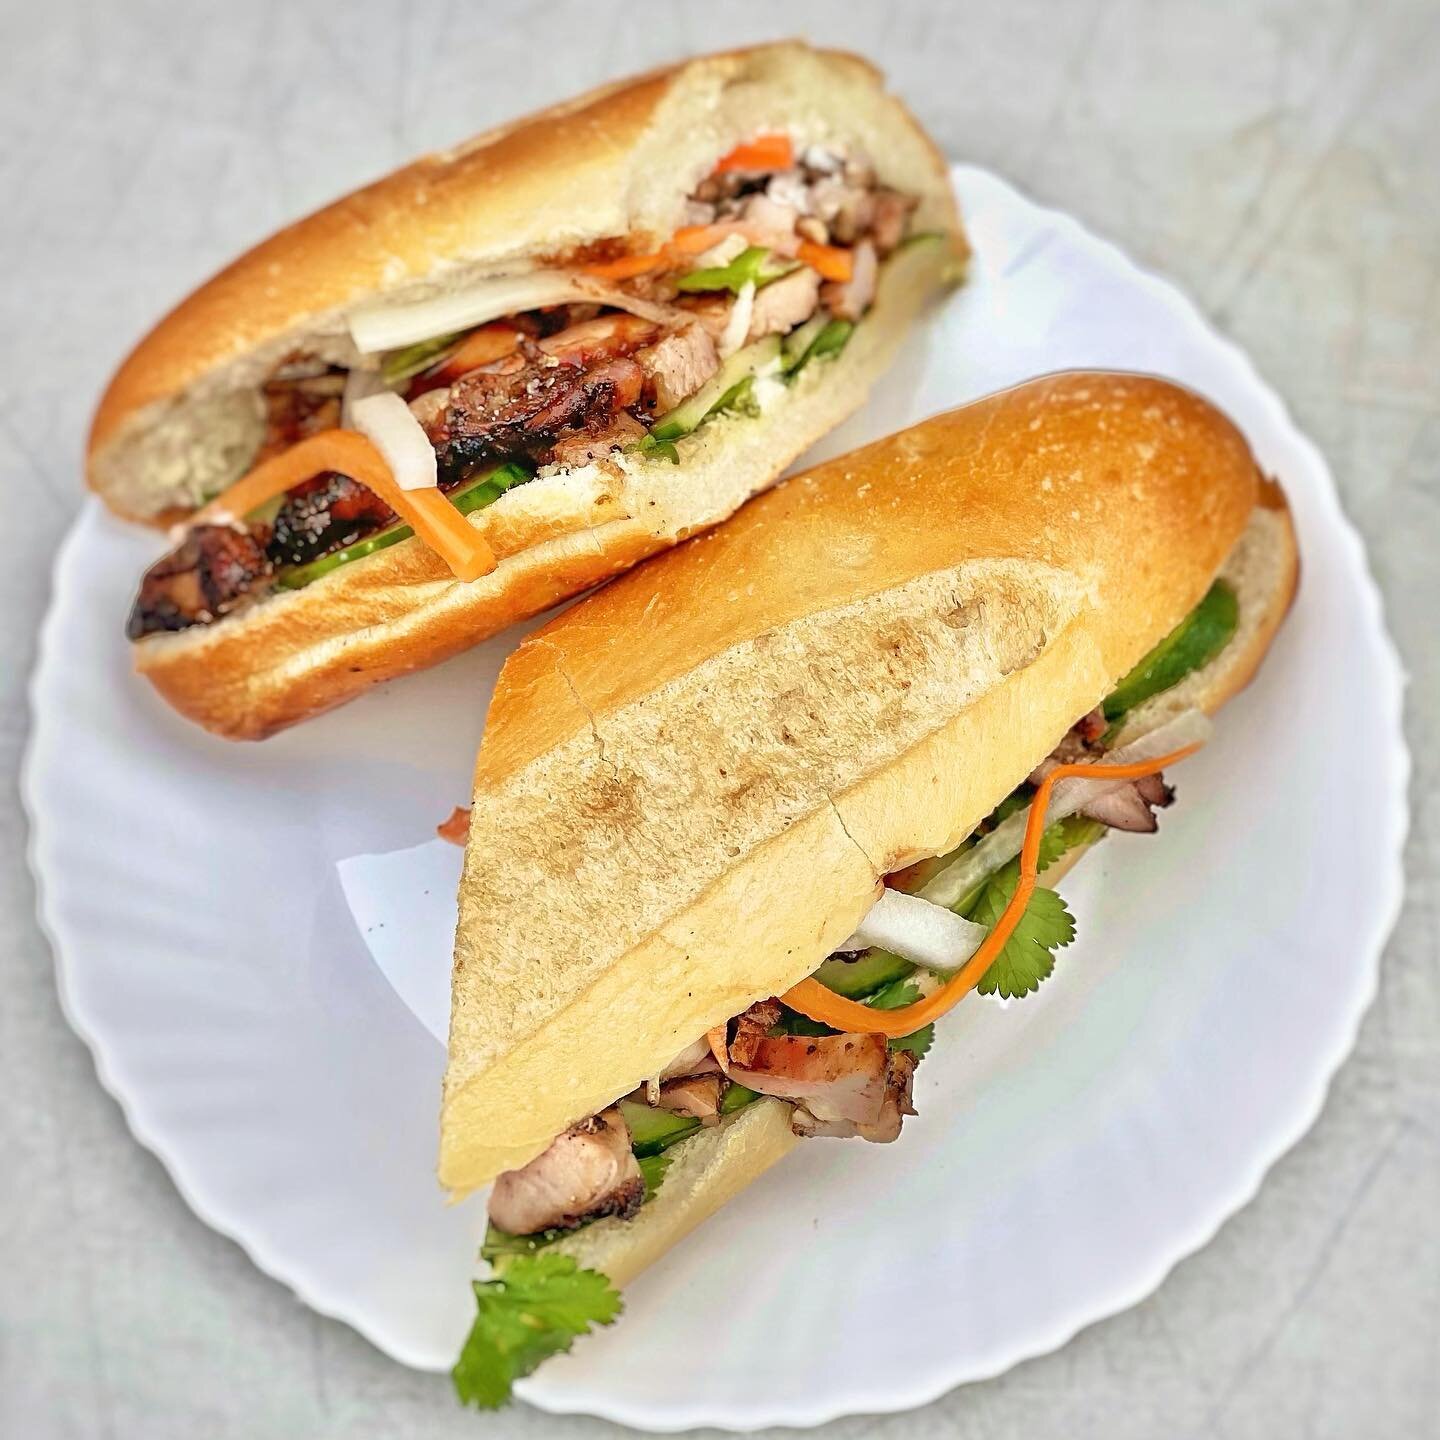 Perfection. @cmartysjerk b&aacute;nh m&igrave; all day.